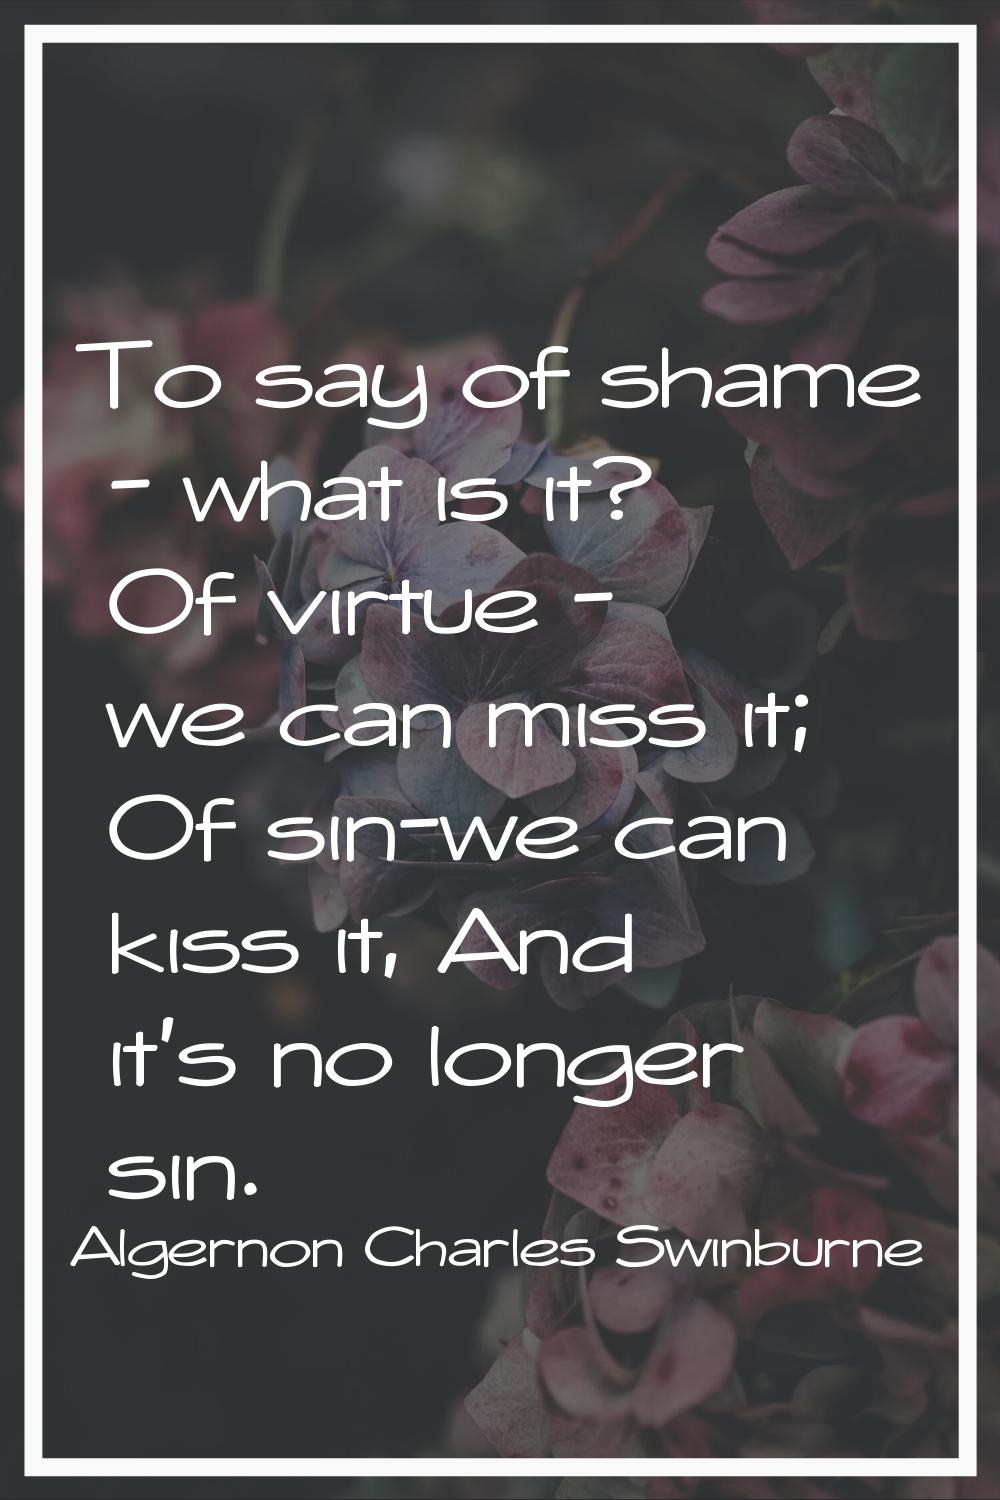 To say of shame - what is it? Of virtue - we can miss it; Of sin-we can kiss it, And it's no longer